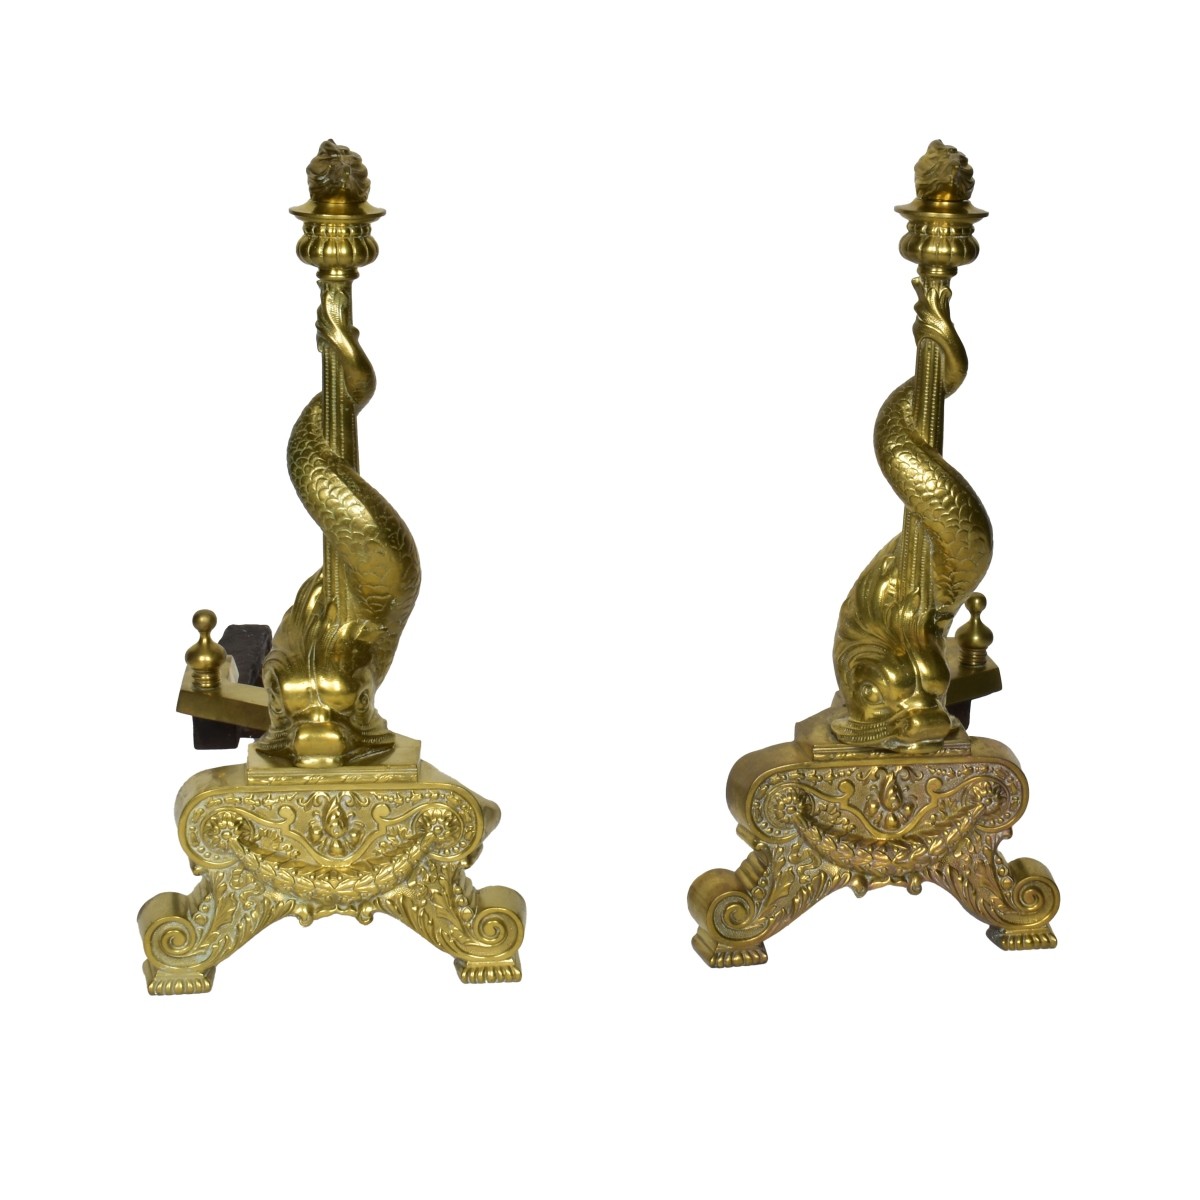 Pair of 19th C. Empire Style Chenets